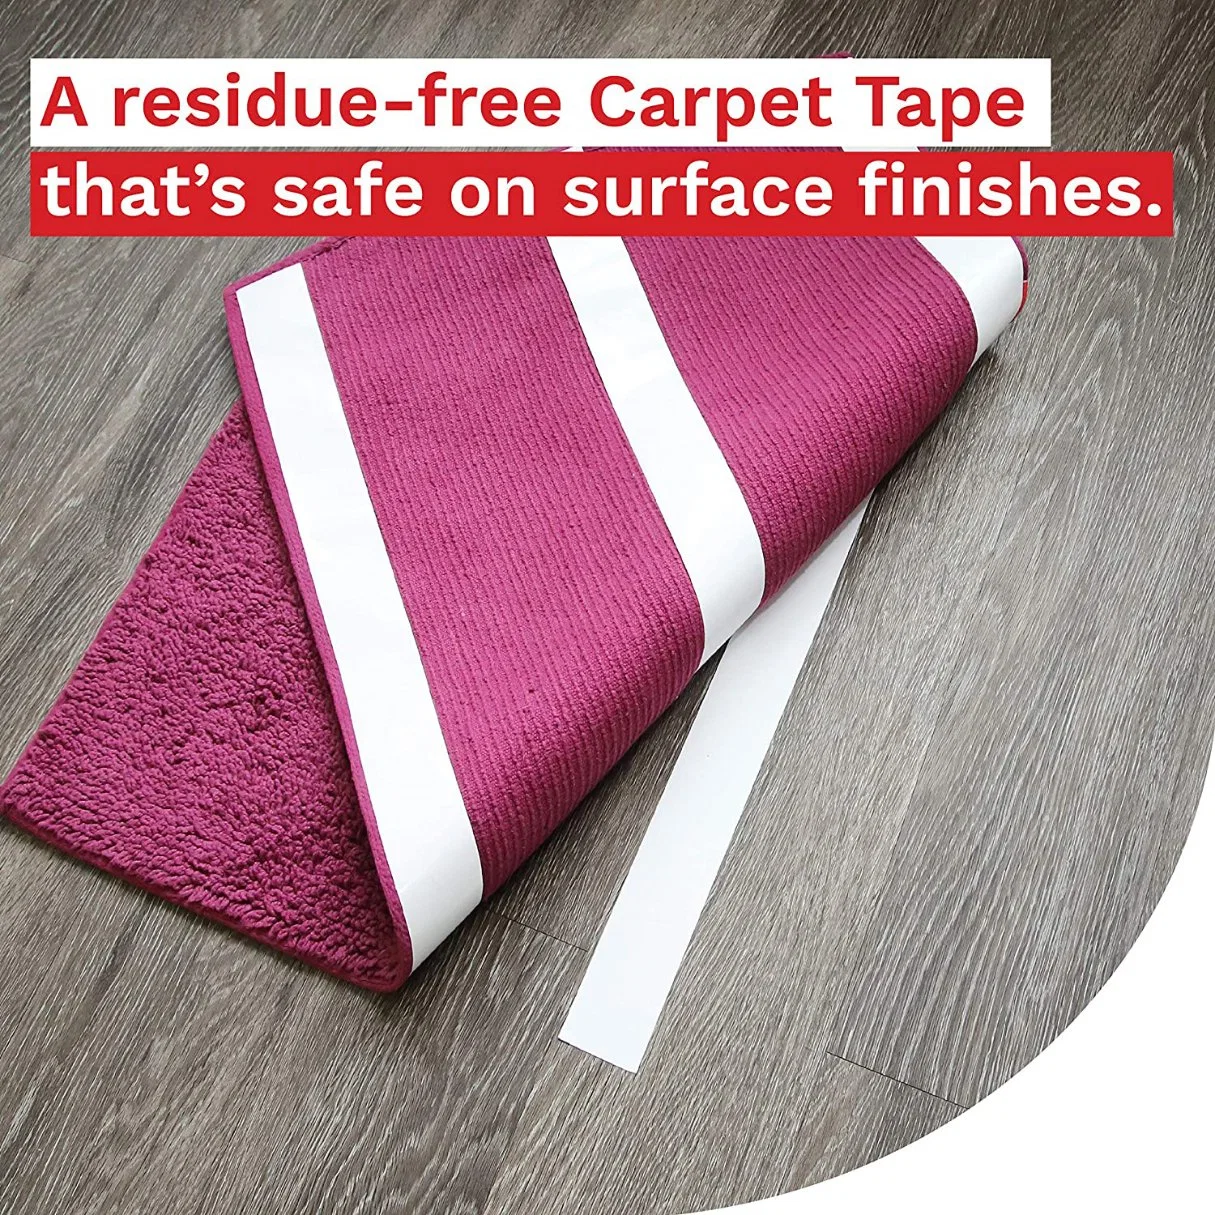 Double Side Carpet Tape High Tack Strong Adhesion Tape